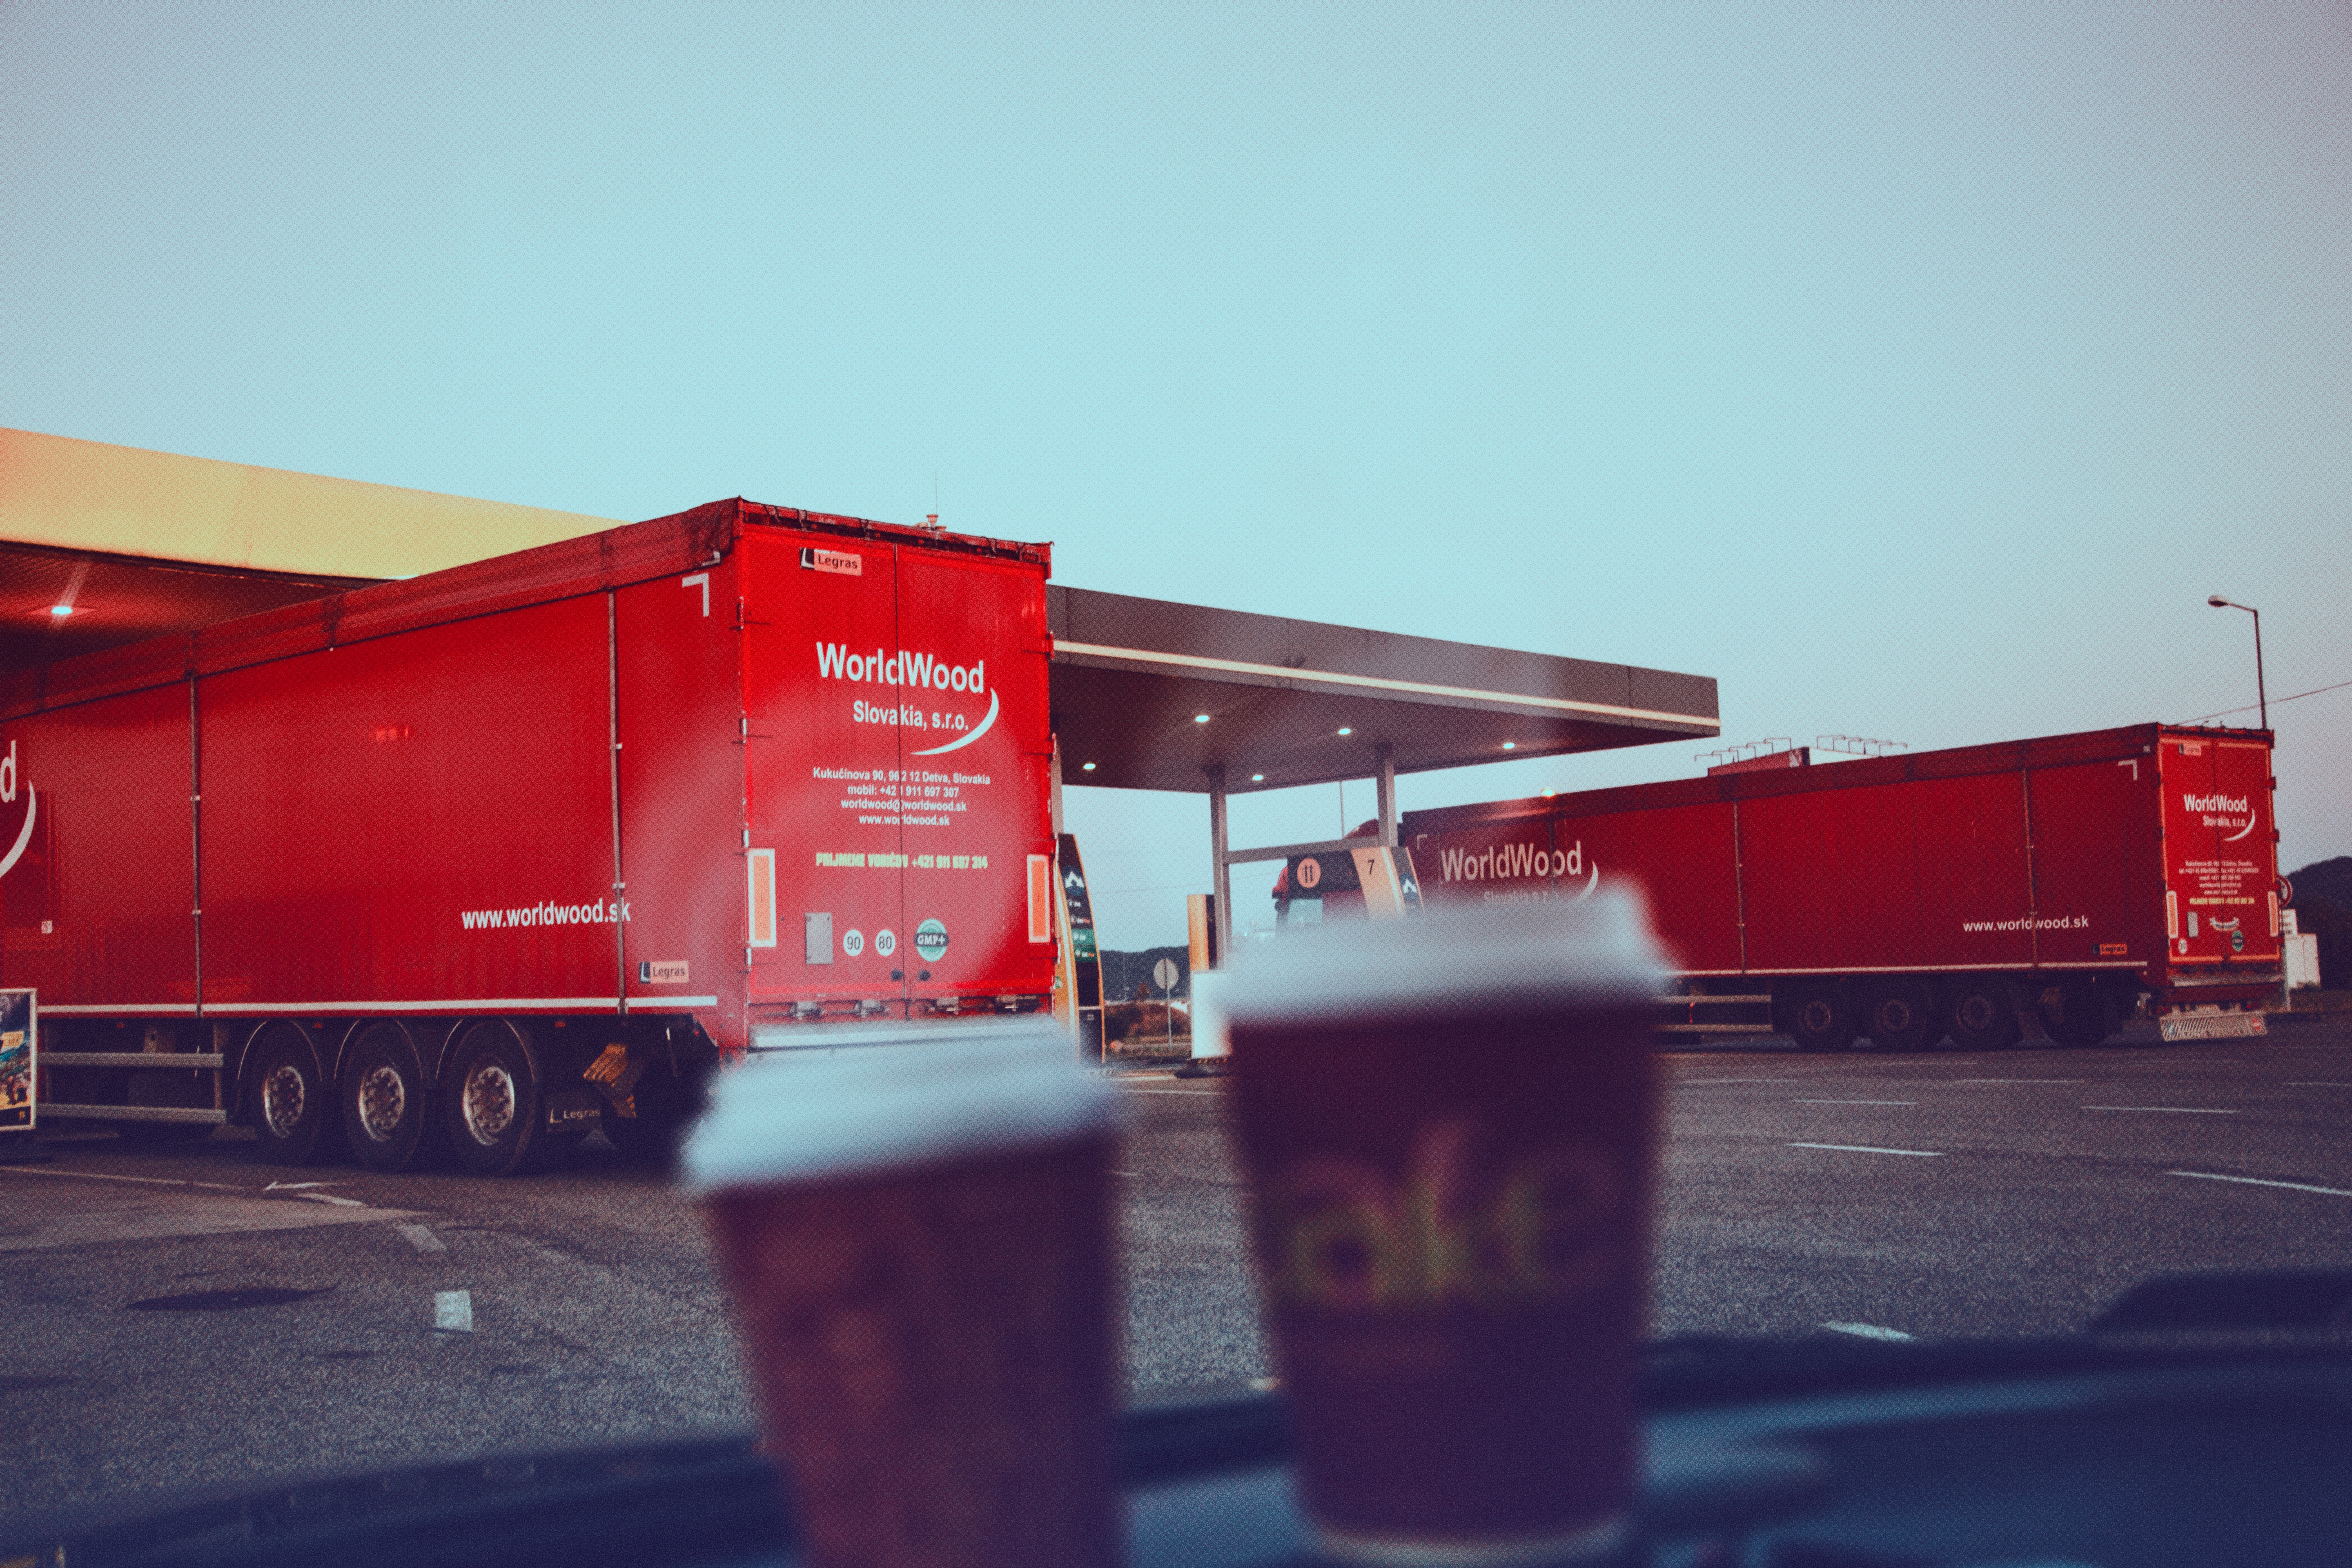 Photo taken from the inside of a vehicle, where two take-away coffee cups rest on the dashboard. through the windshield we see  two heavy-duty trucks taking a break mid route at a fuel retail location.